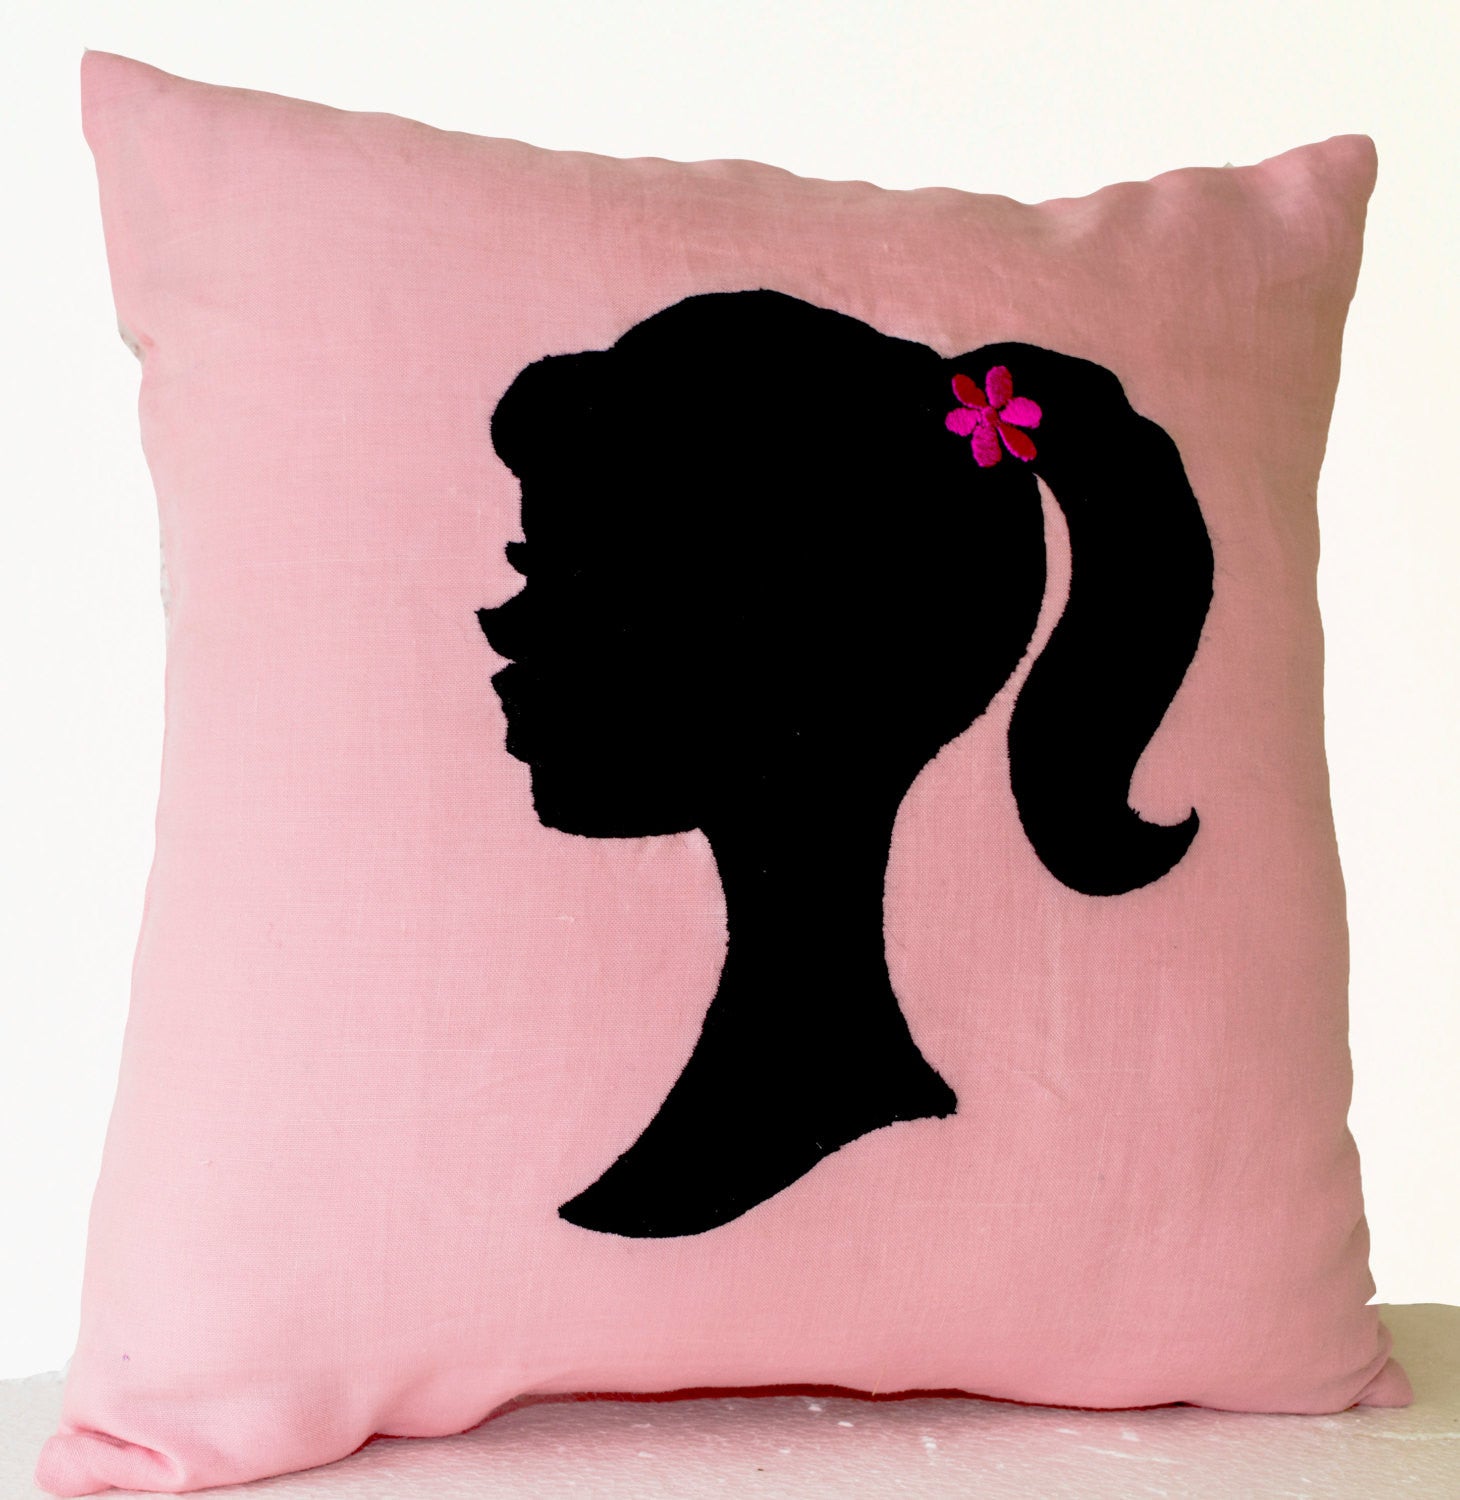 Shop online for handmade personalized light pink throw pillow – Amore Beauté